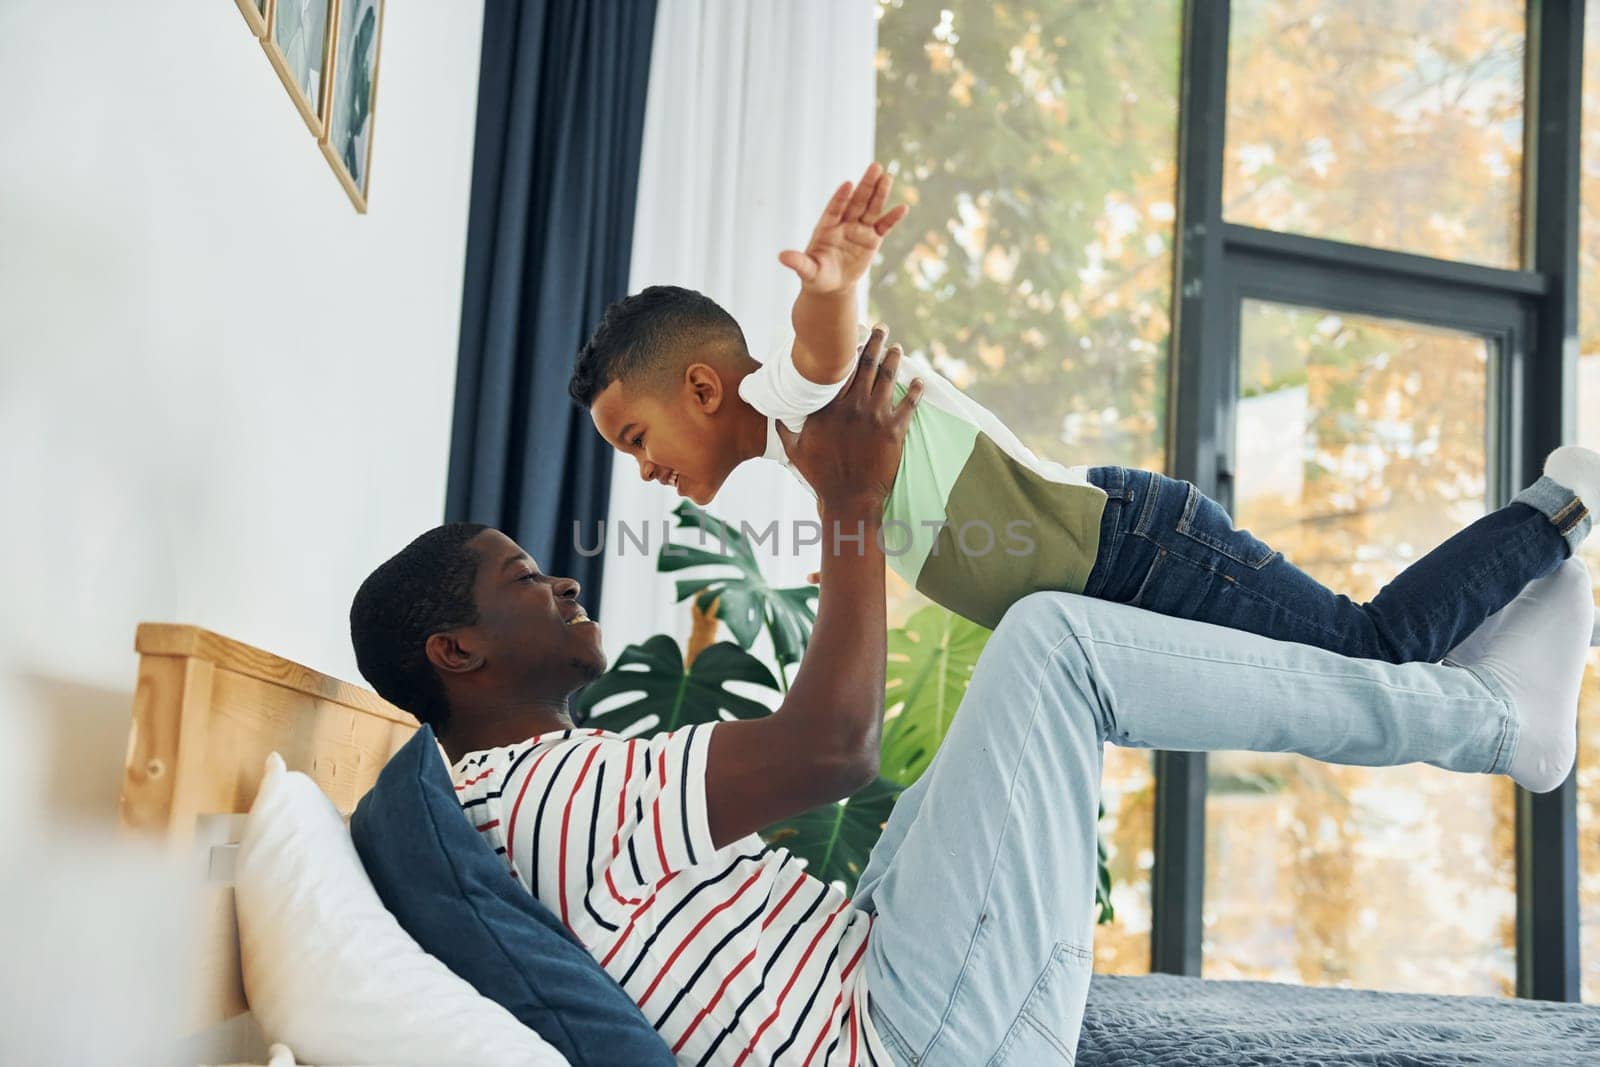 Laying down on the bed and having fun. African american father with his young son at home.